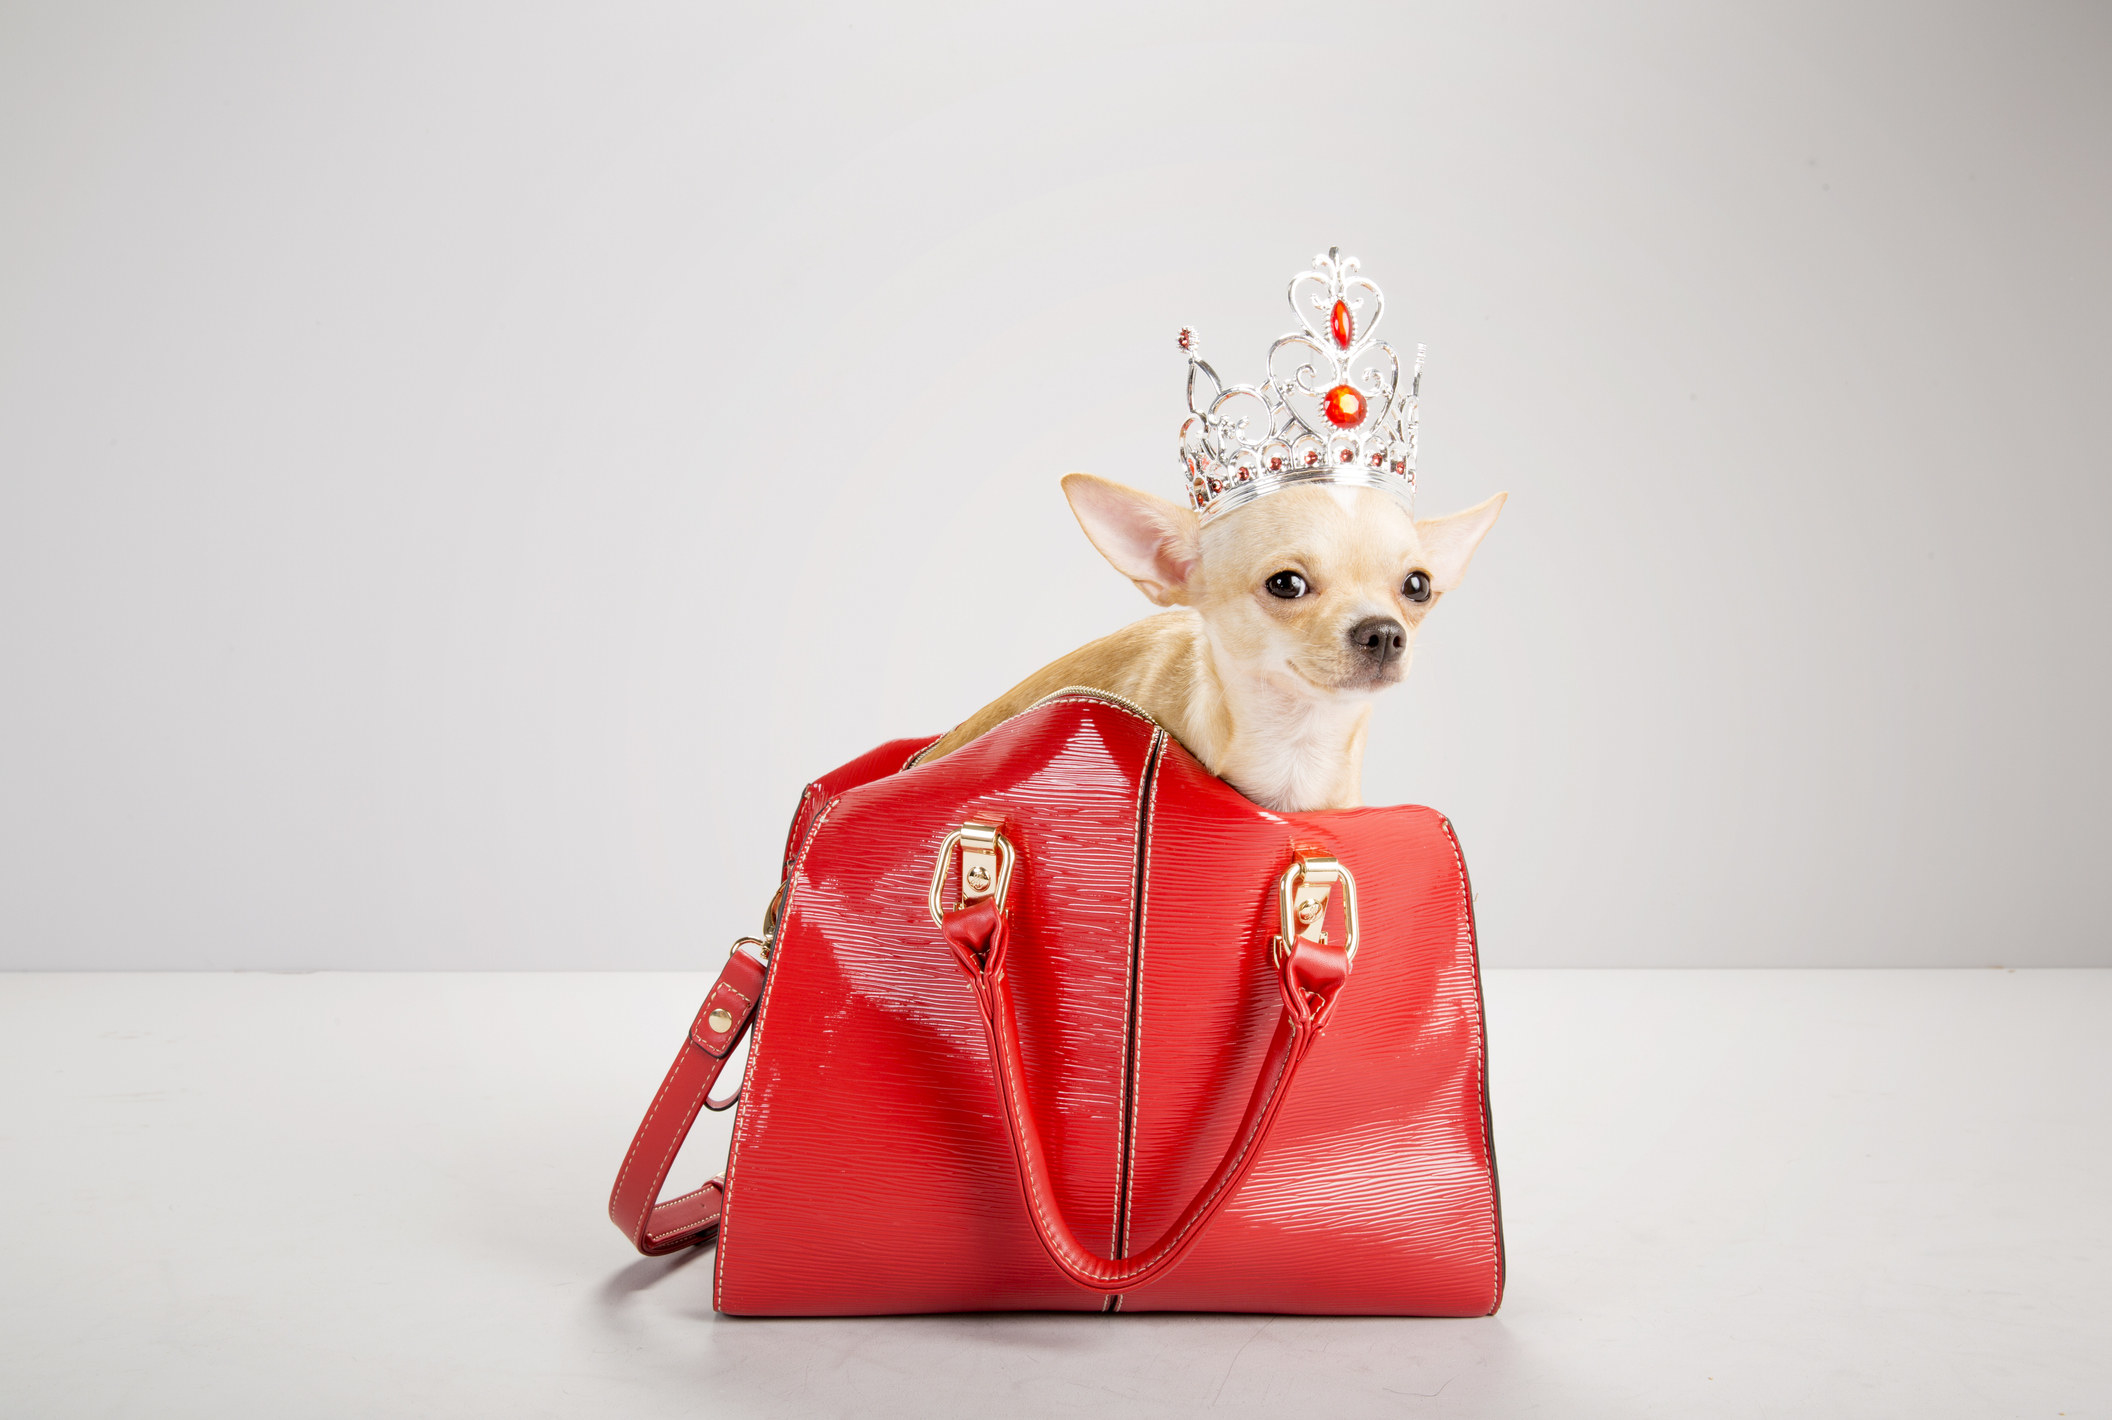 A Chihuahua wearing a crown sits in a red handbag